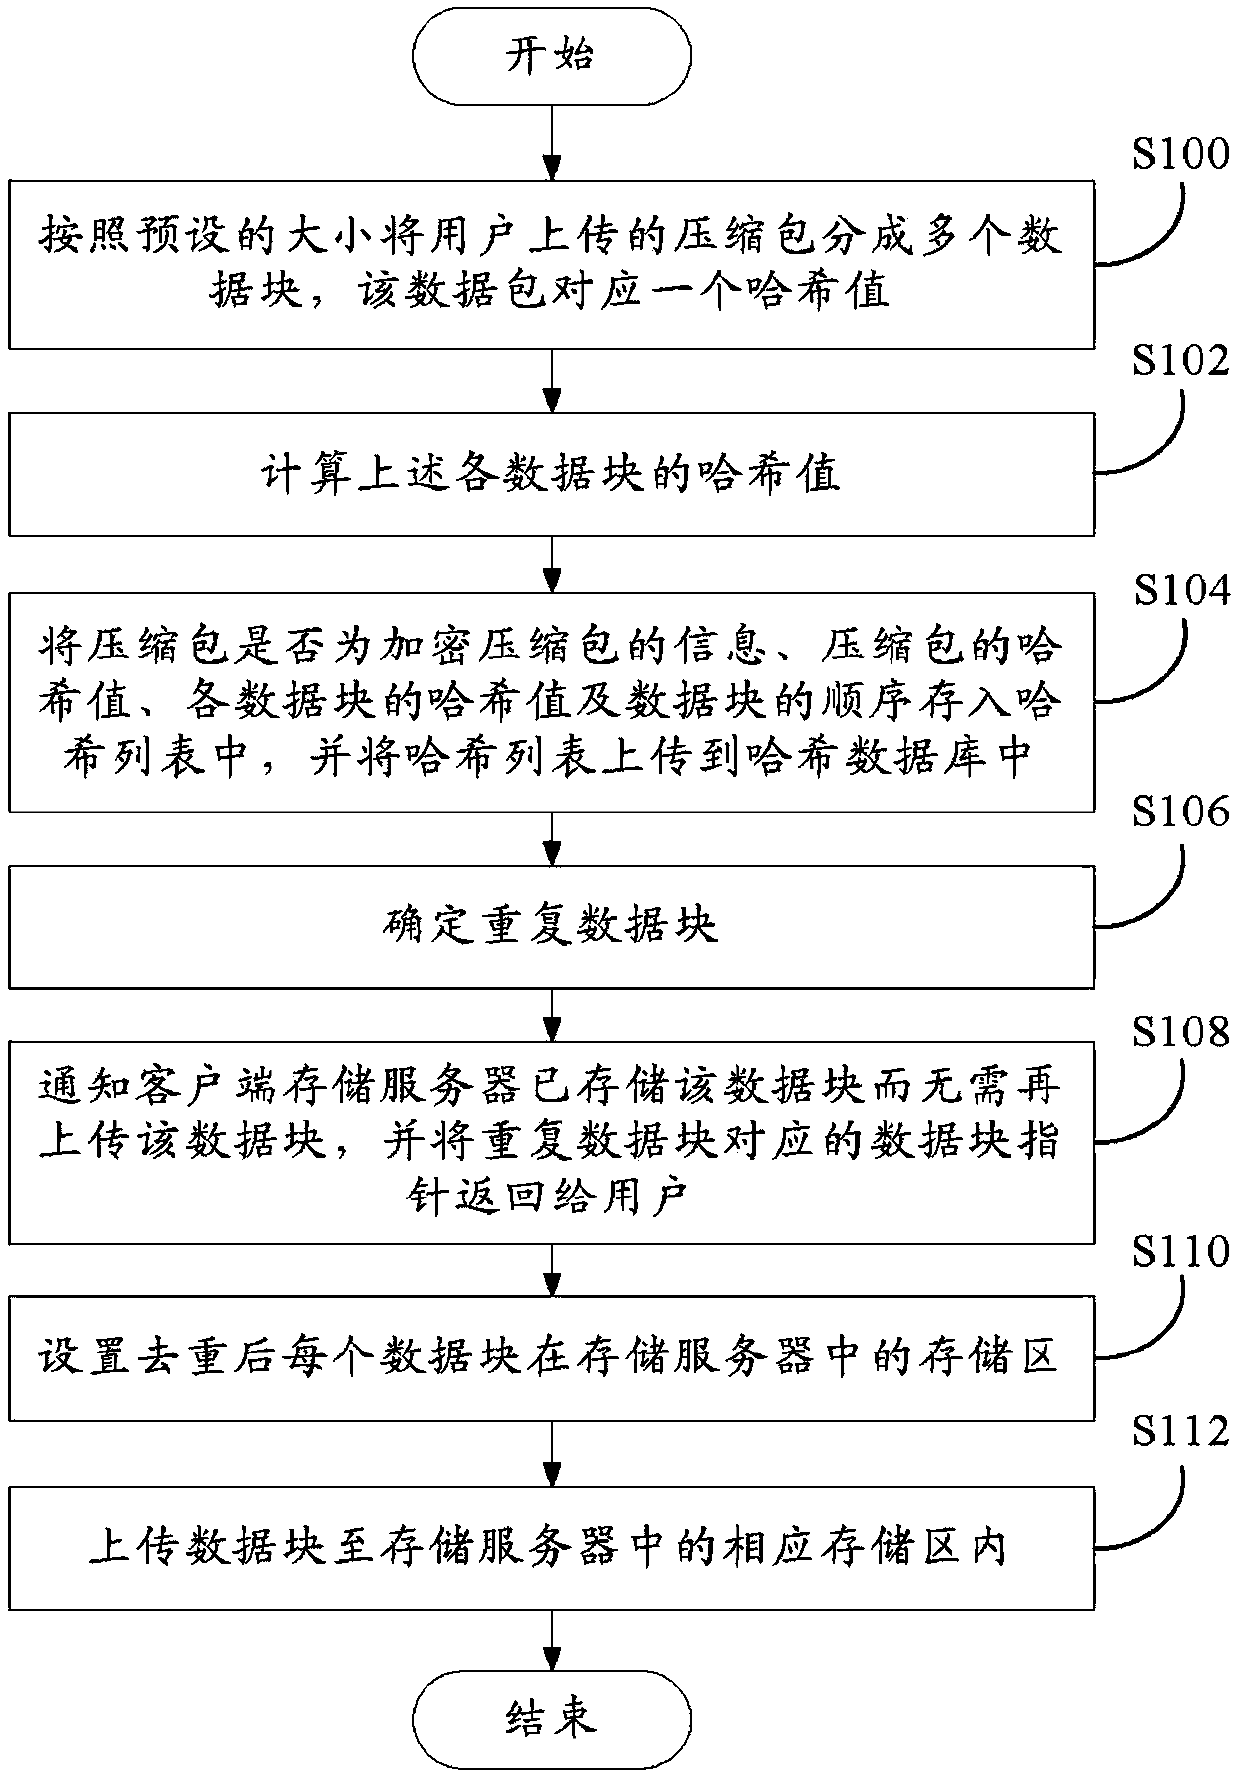 Compression packet uploading and duplication-removing system and method